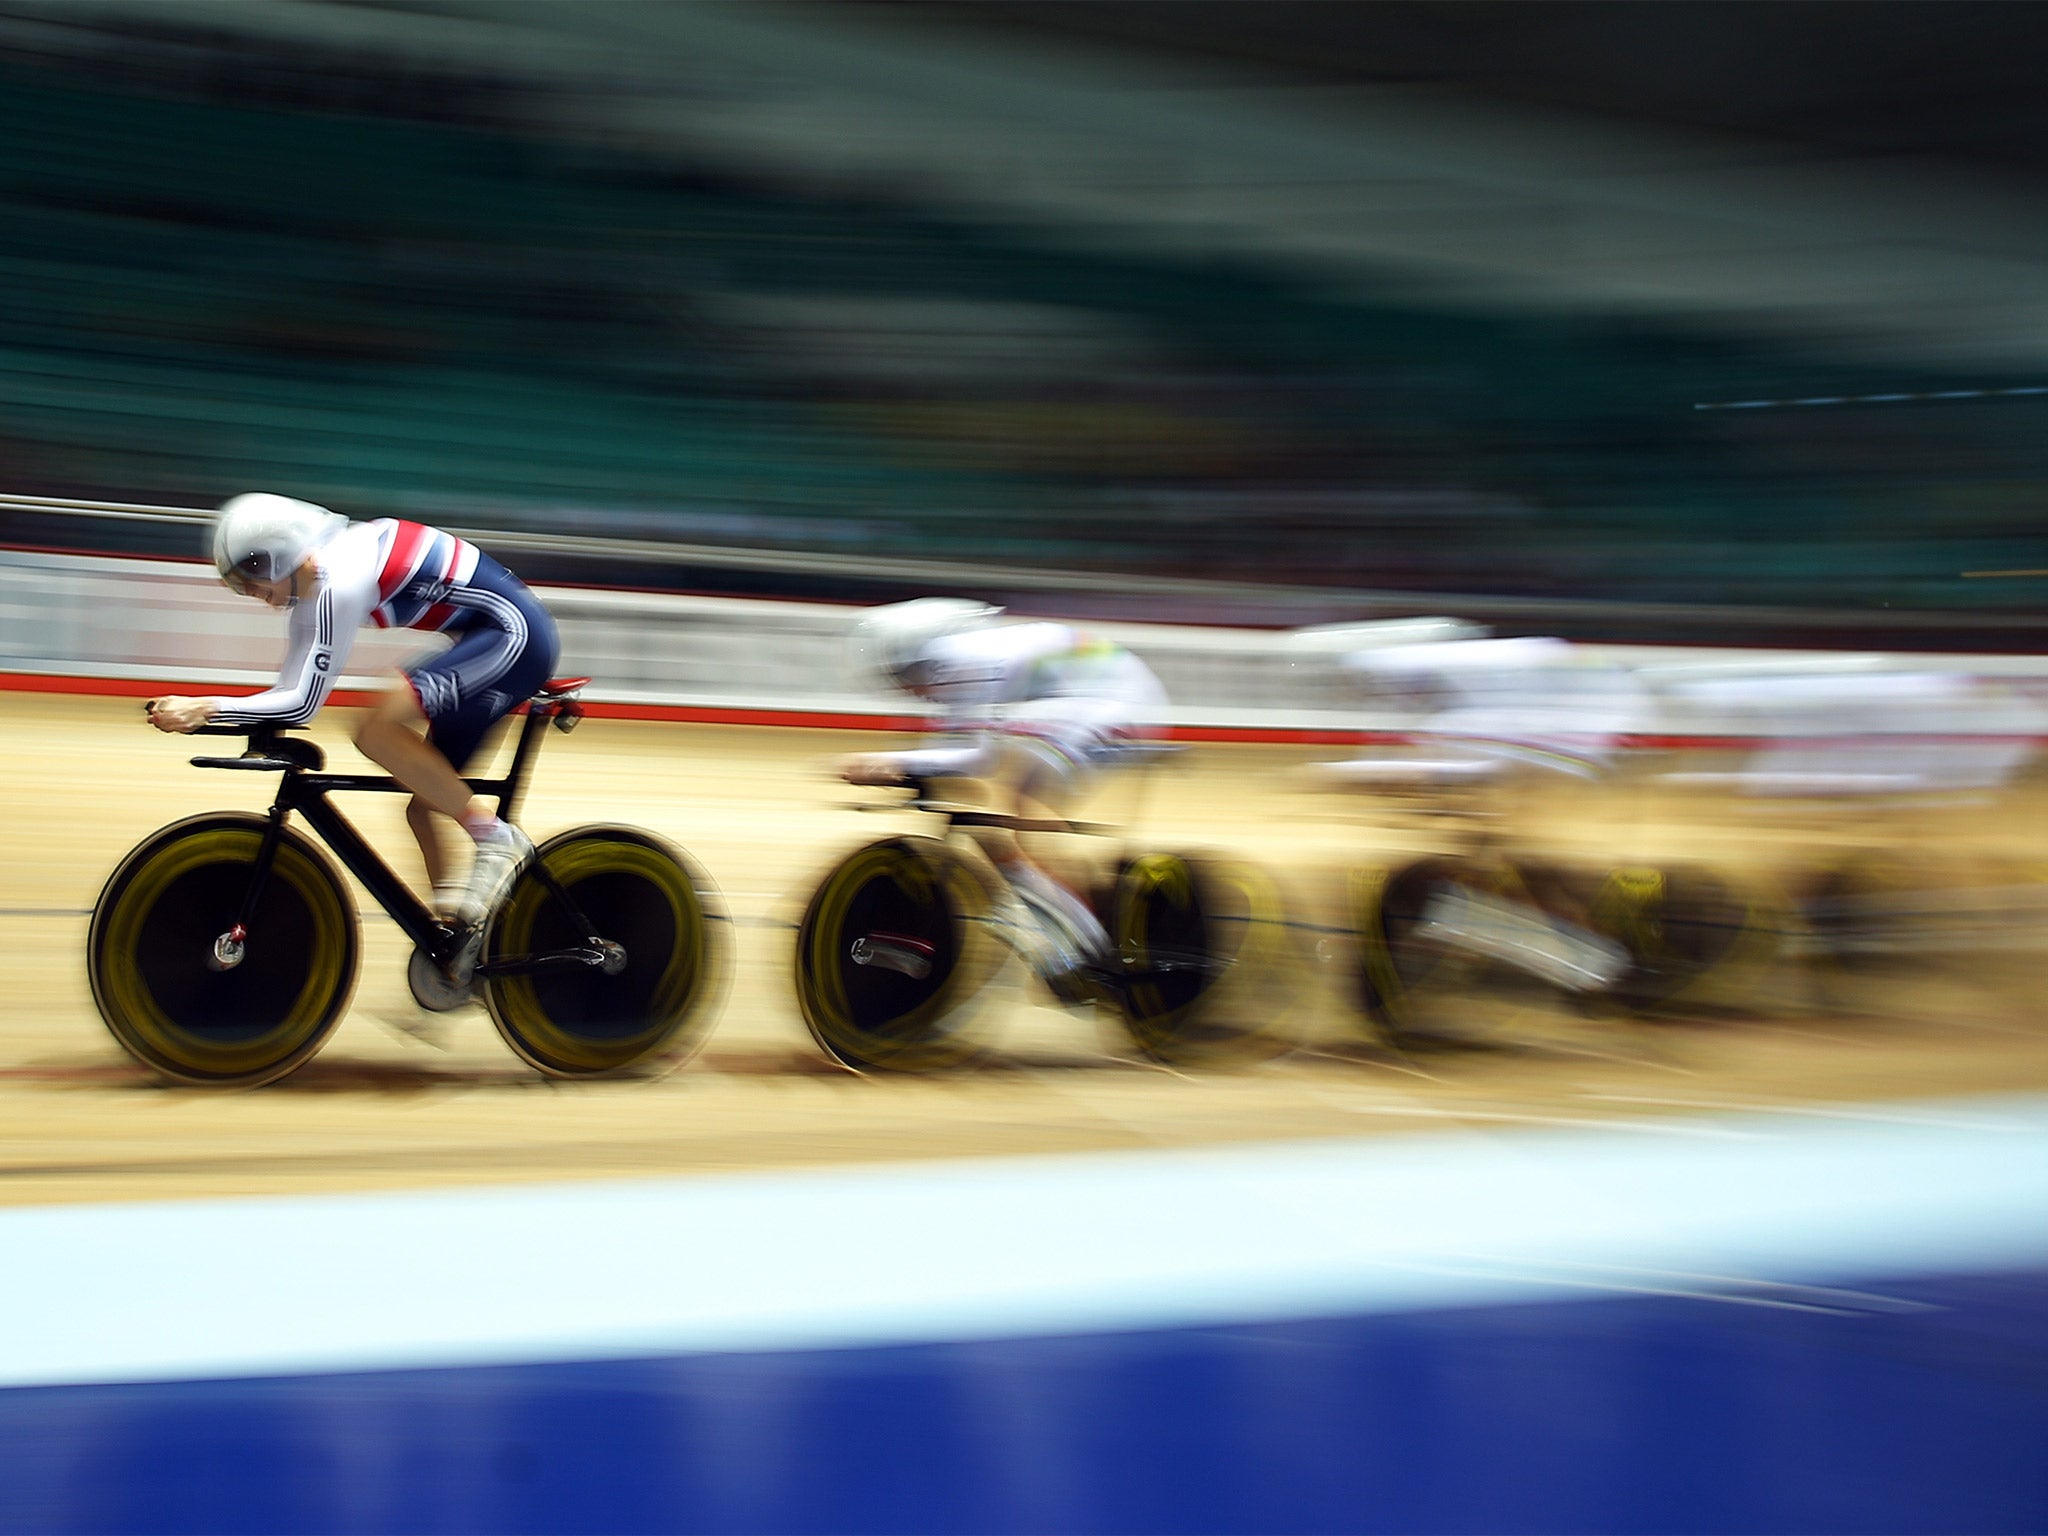 Joanna Rowsell leads the British team to a new world-record time in the qualifying round for the women’s team pursuit at the 2013 Track Cycling World Cup in Manchester